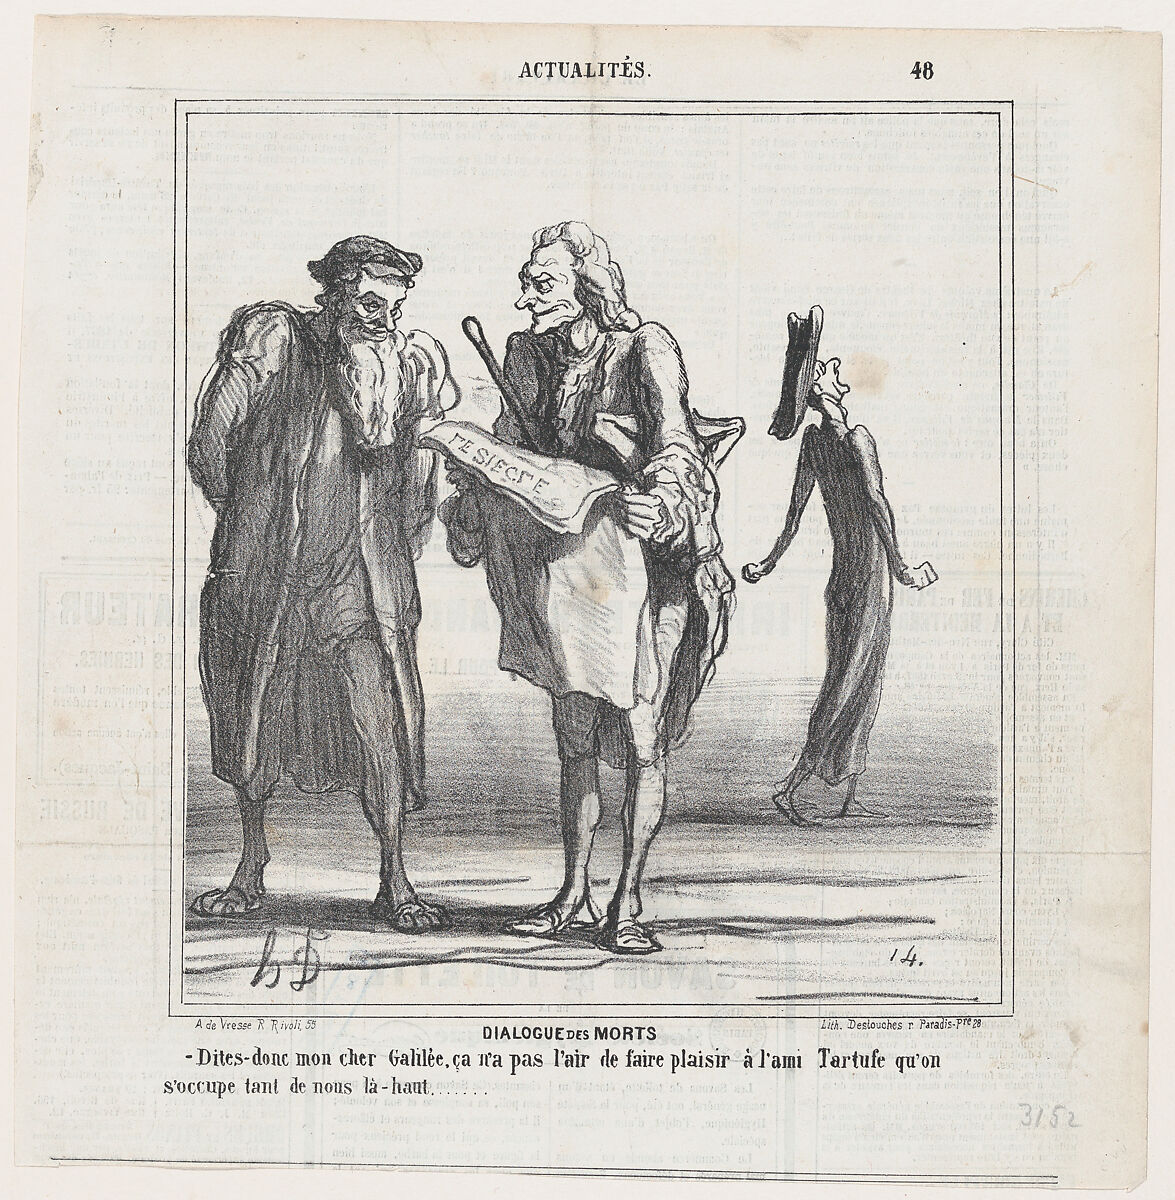 Dialogue of the dead: Say, my dear Galileo, this will not please our old friend Tartuffe that they are paying so much attention to us, from 'News of the day,' published in "Le Charivari", Honoré Daumier (French, Marseilles 1808–1879 Valmondois), Lithograph on newsprint; third state of three (Delteil) 